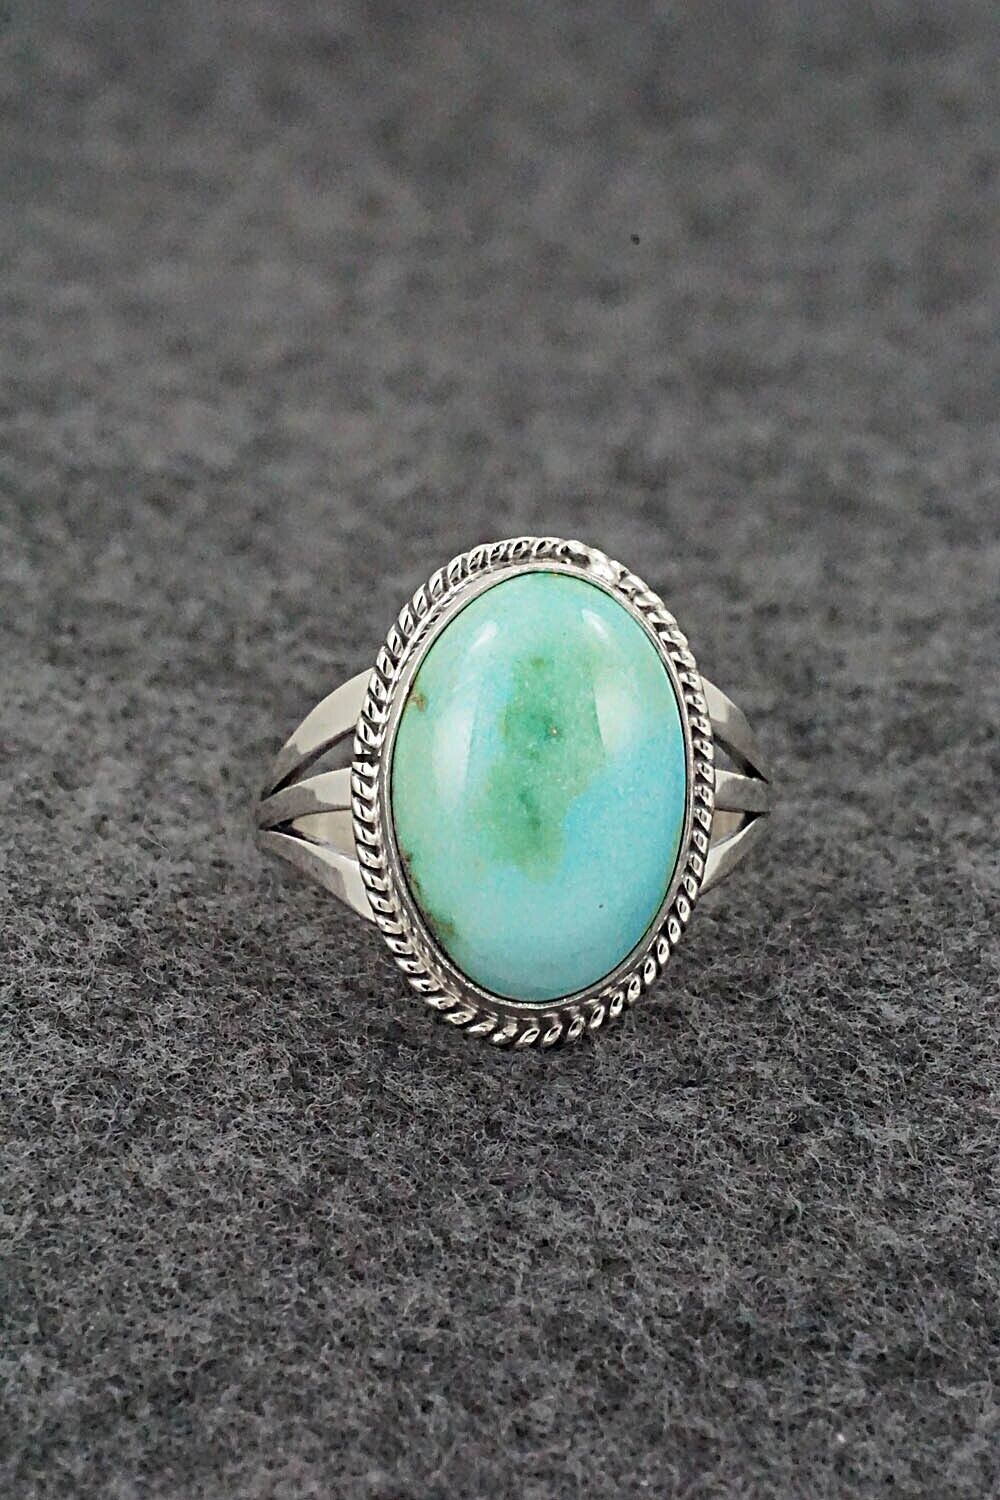 Turquoise & Sterling Silver Ring - Judy Largo - Size 8.75